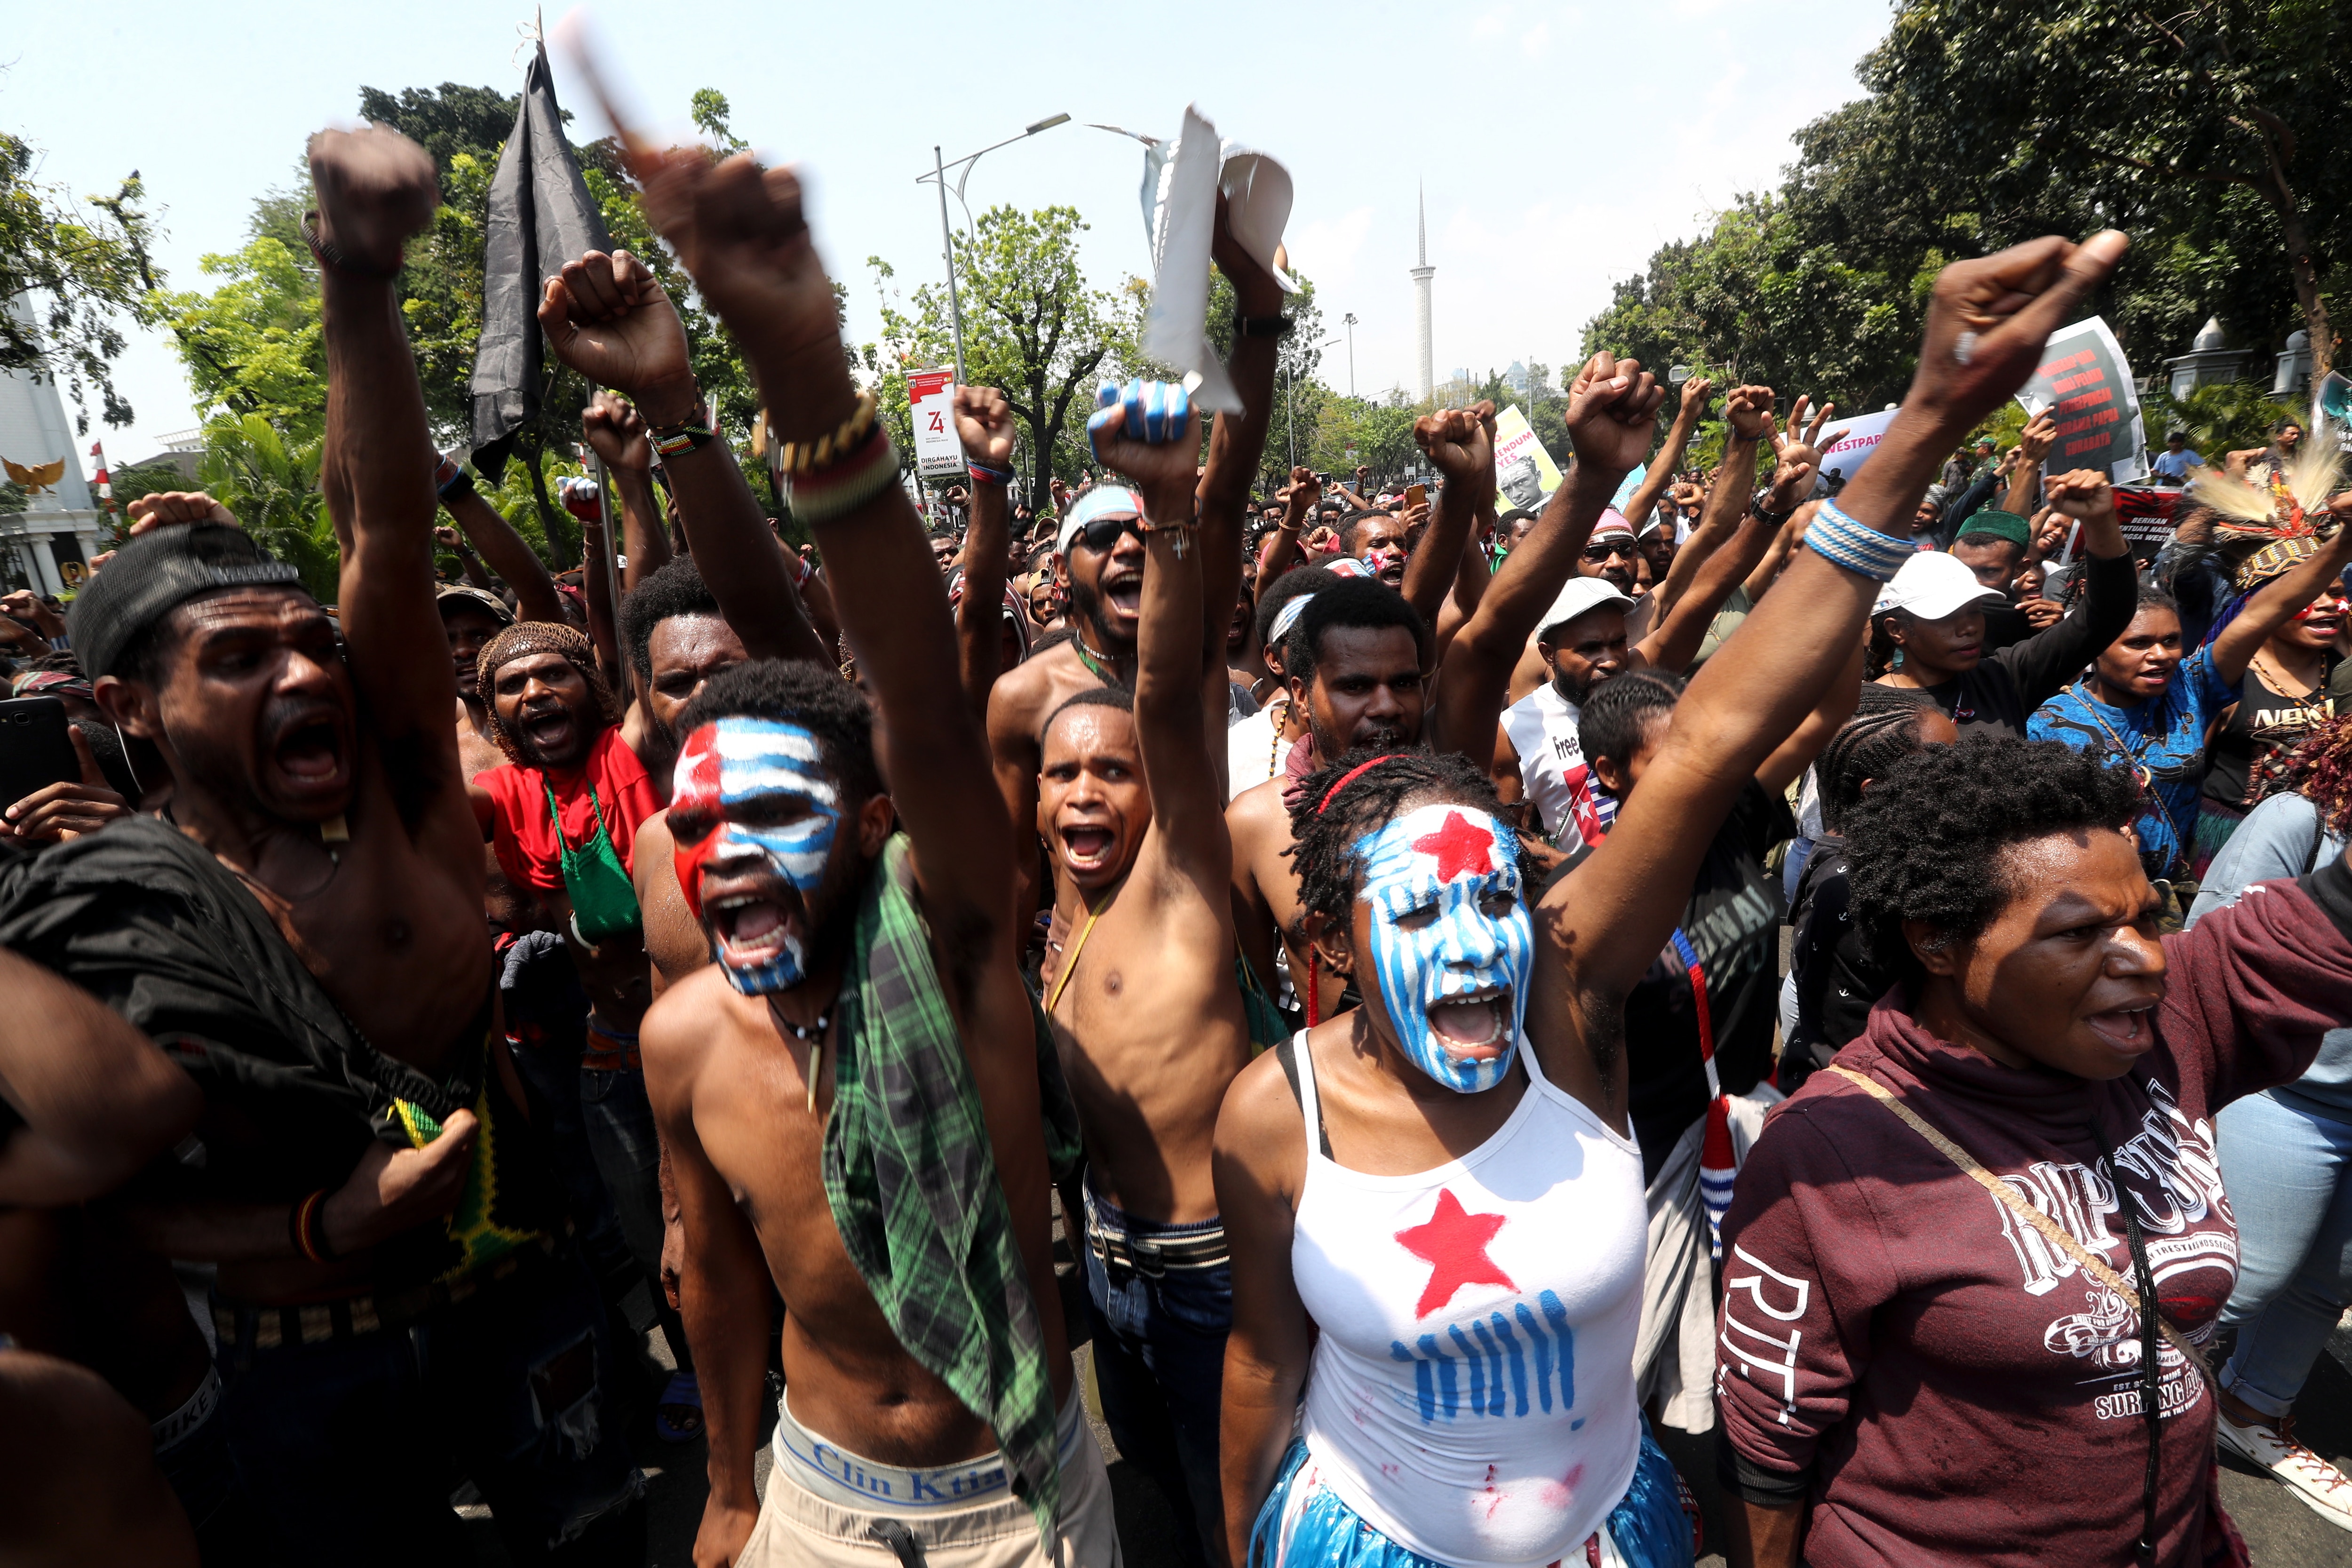 Papuan activists shout slogans during a rally in Jakarta, Indonesia, 22 August 2019.